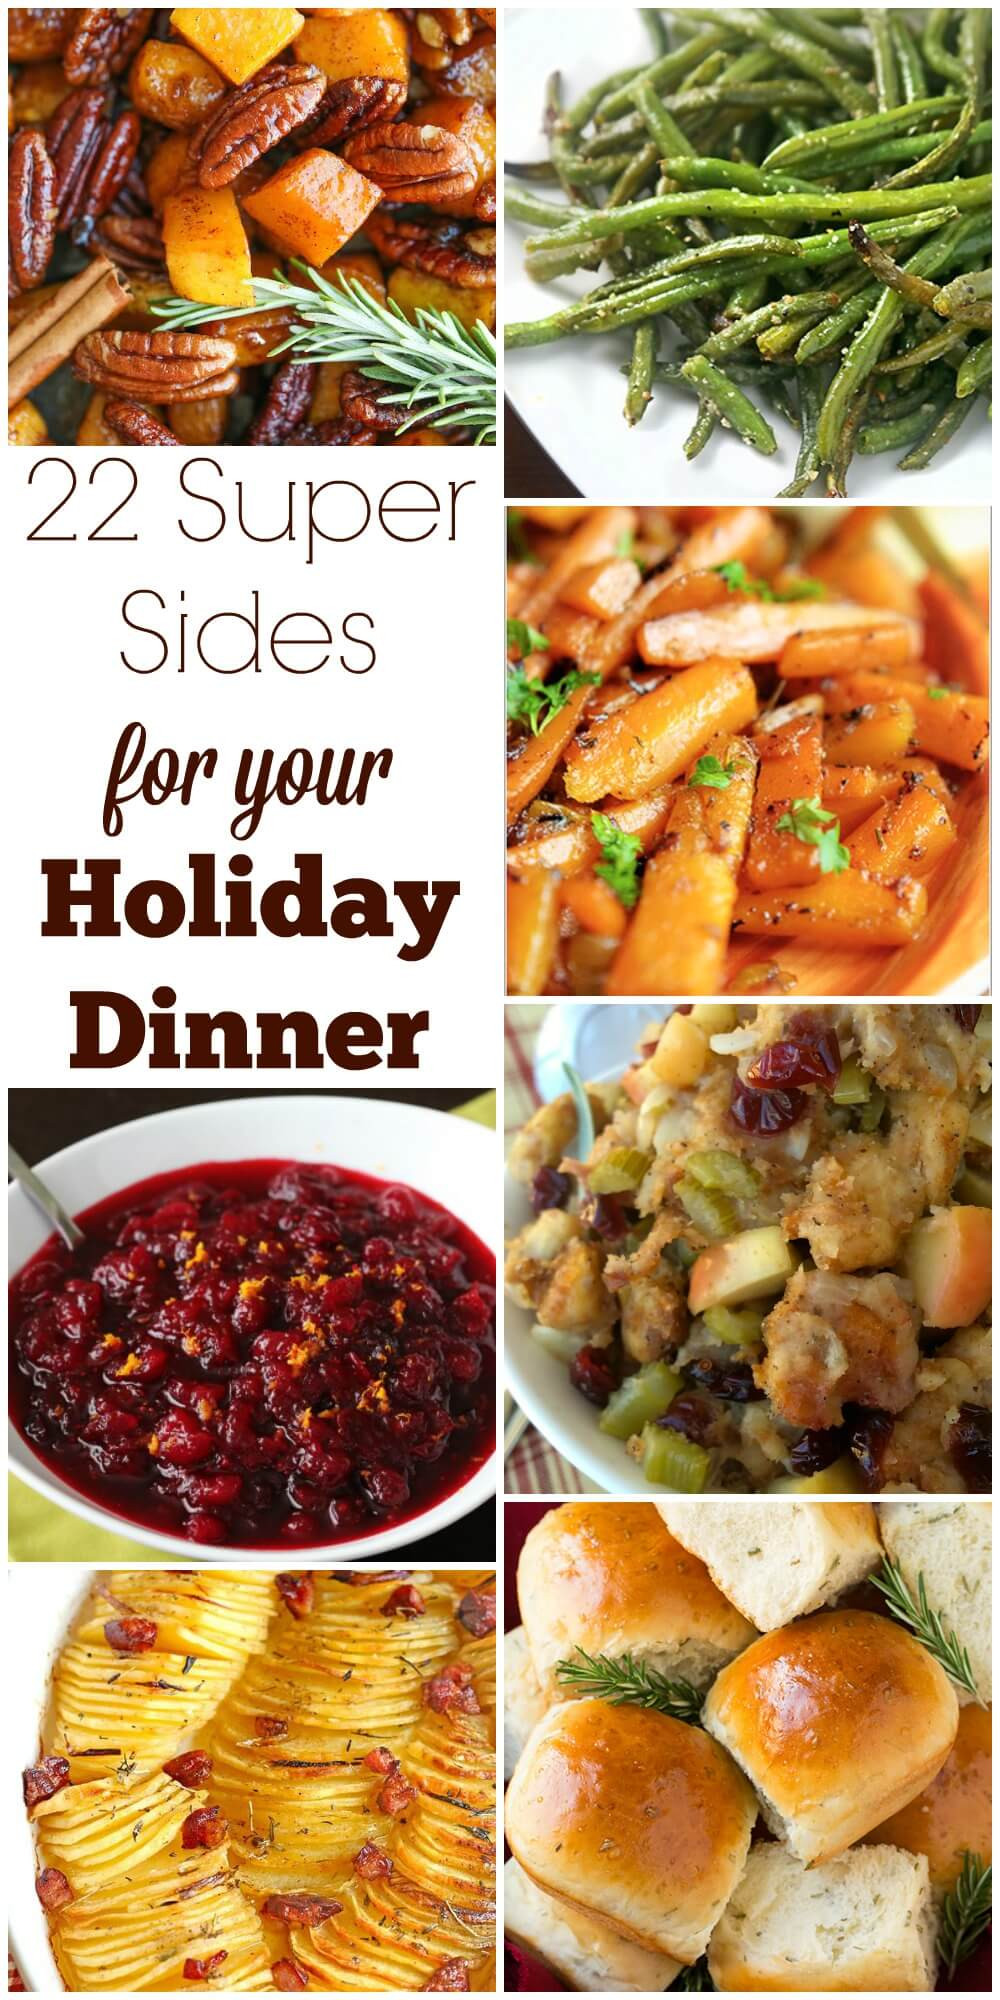 Side Dishes For Christmas Buffet
 22 Super Sides for Your Holiday Dinner